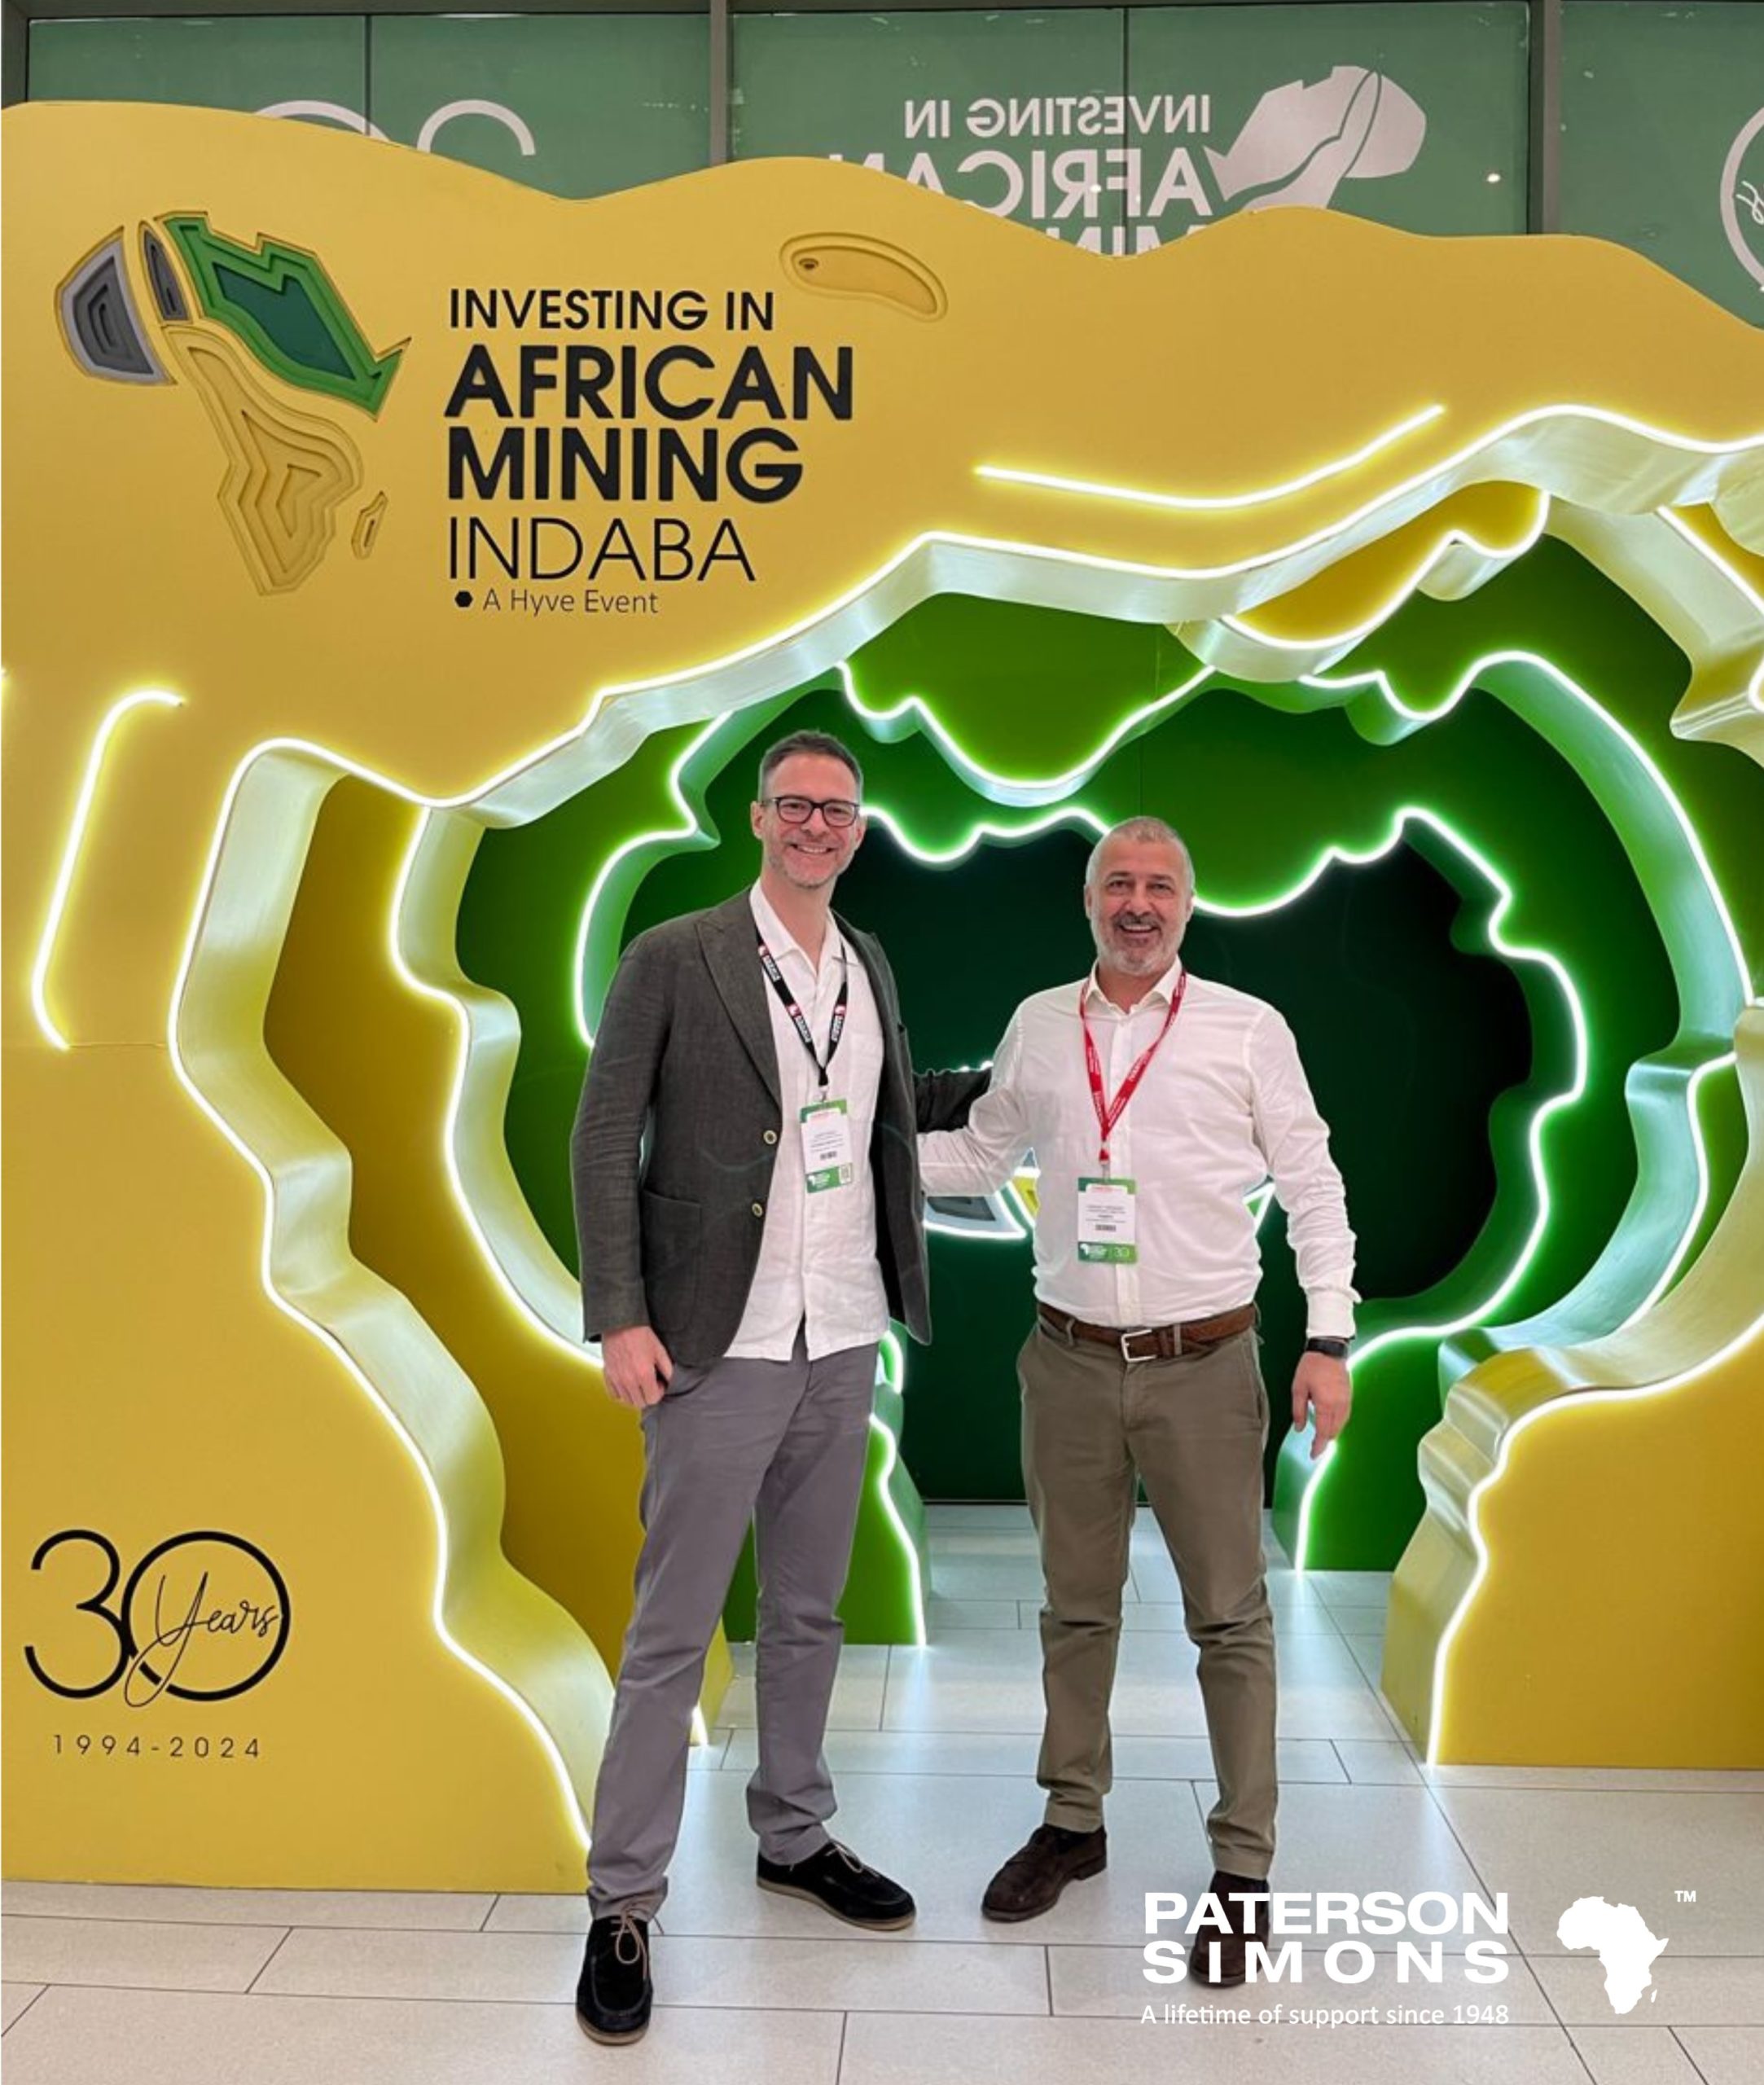 PATERSON SIMONS ASSISTE AU « INVESTING IN AFRICAN MINING INDABA » 2024